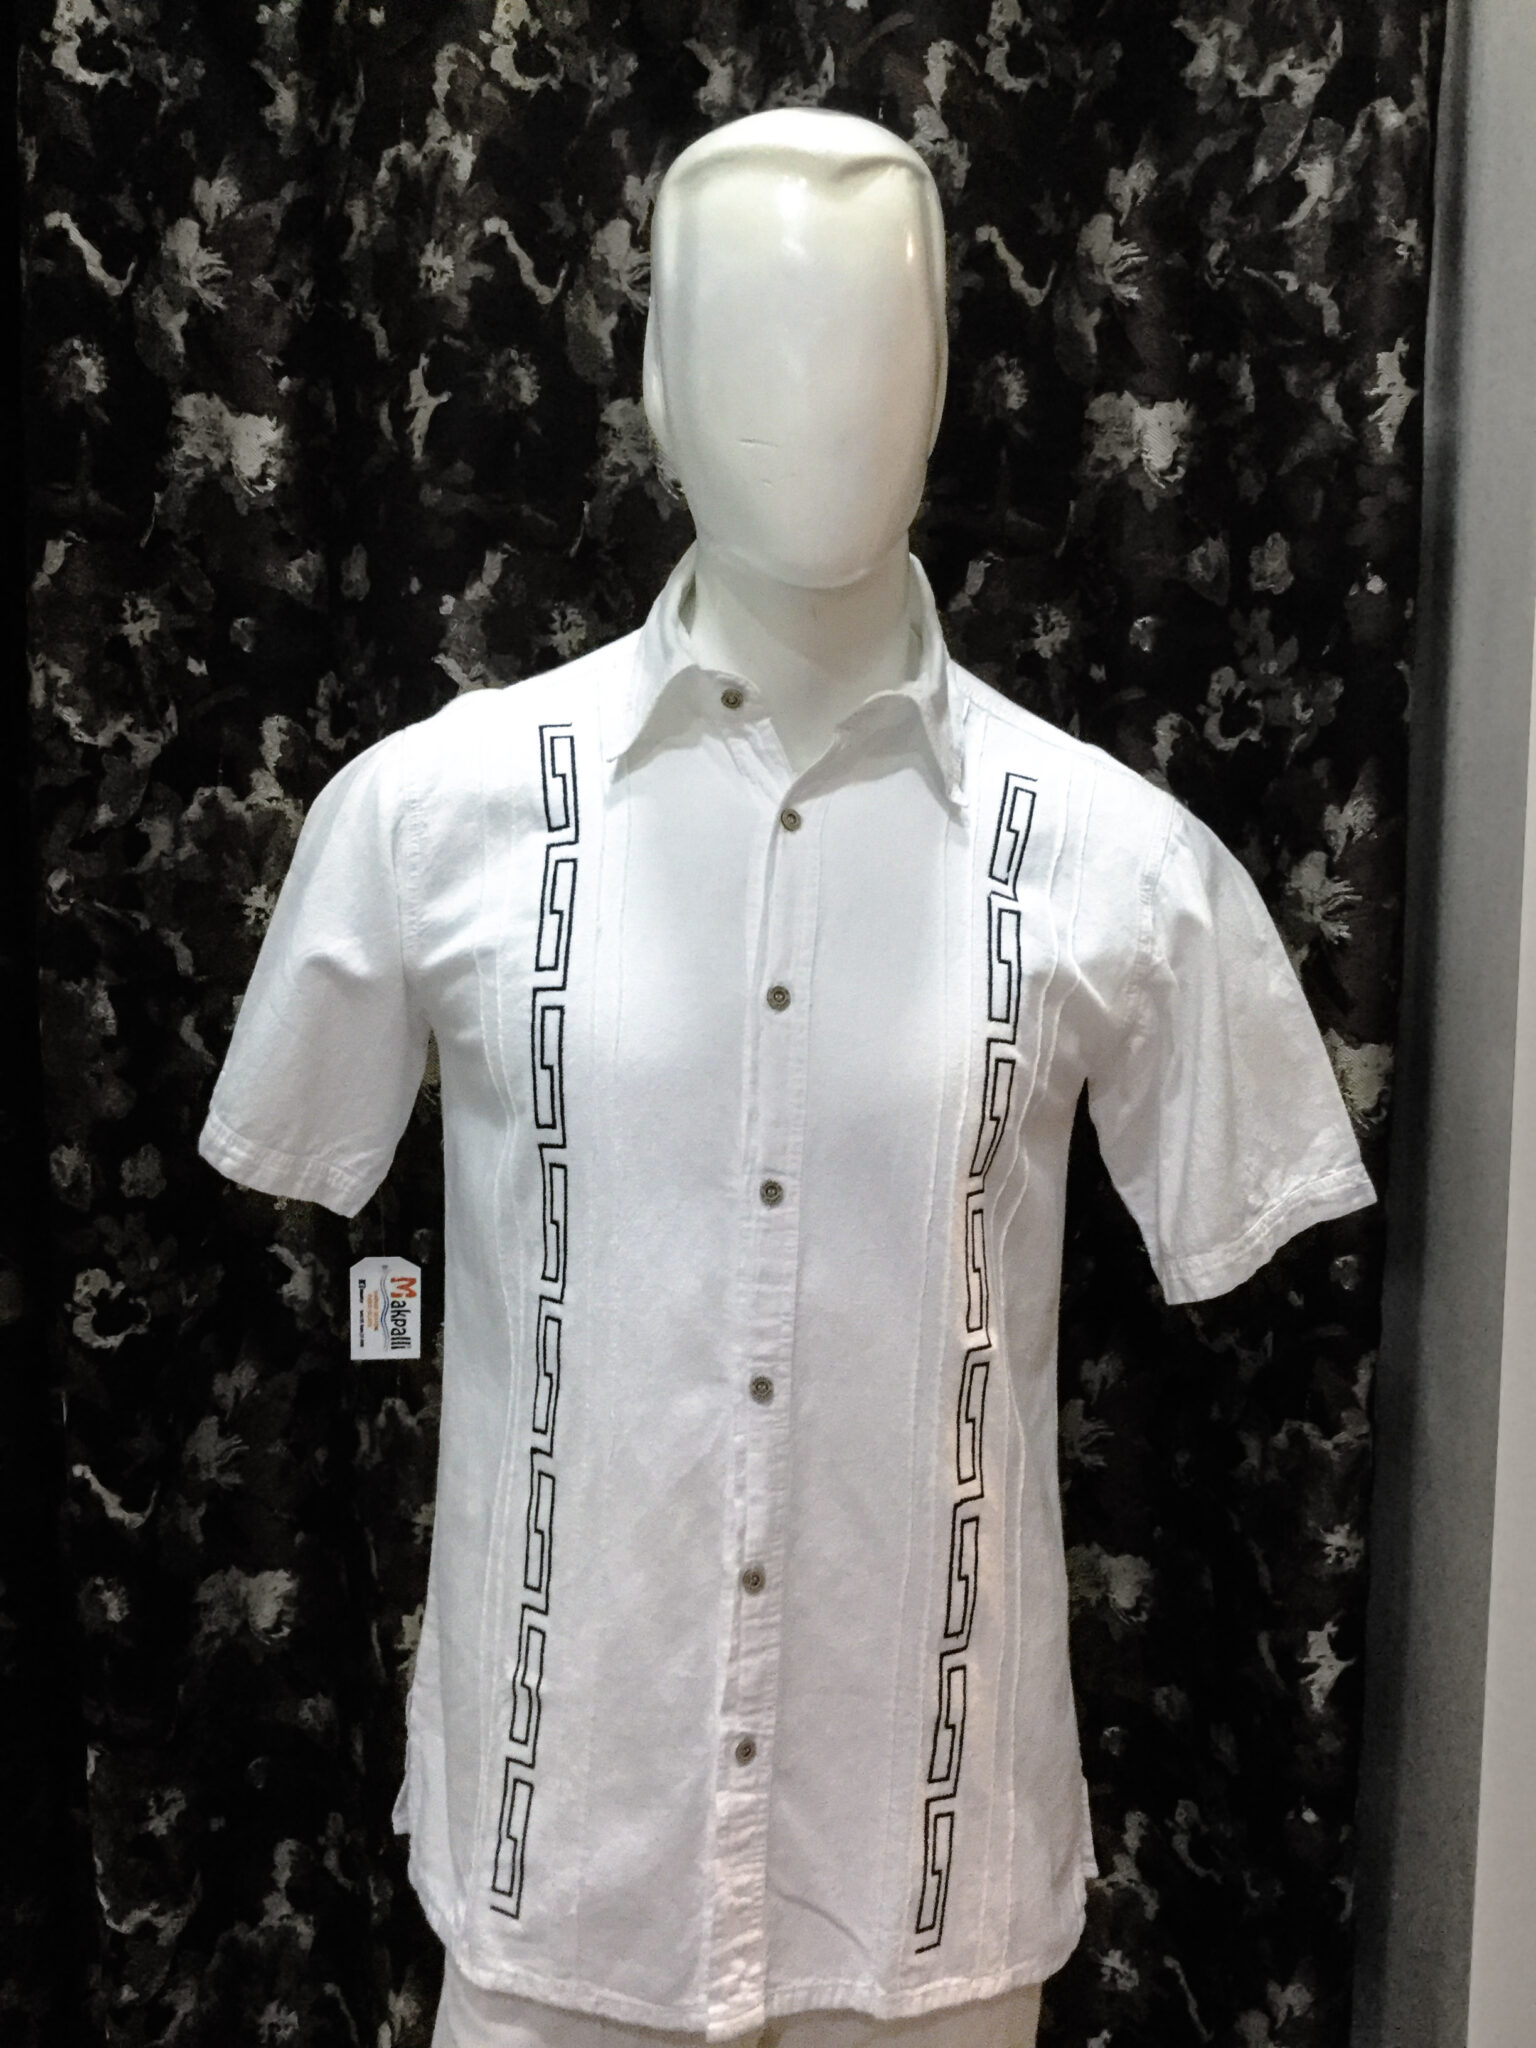 mexican embroidered button down shirt